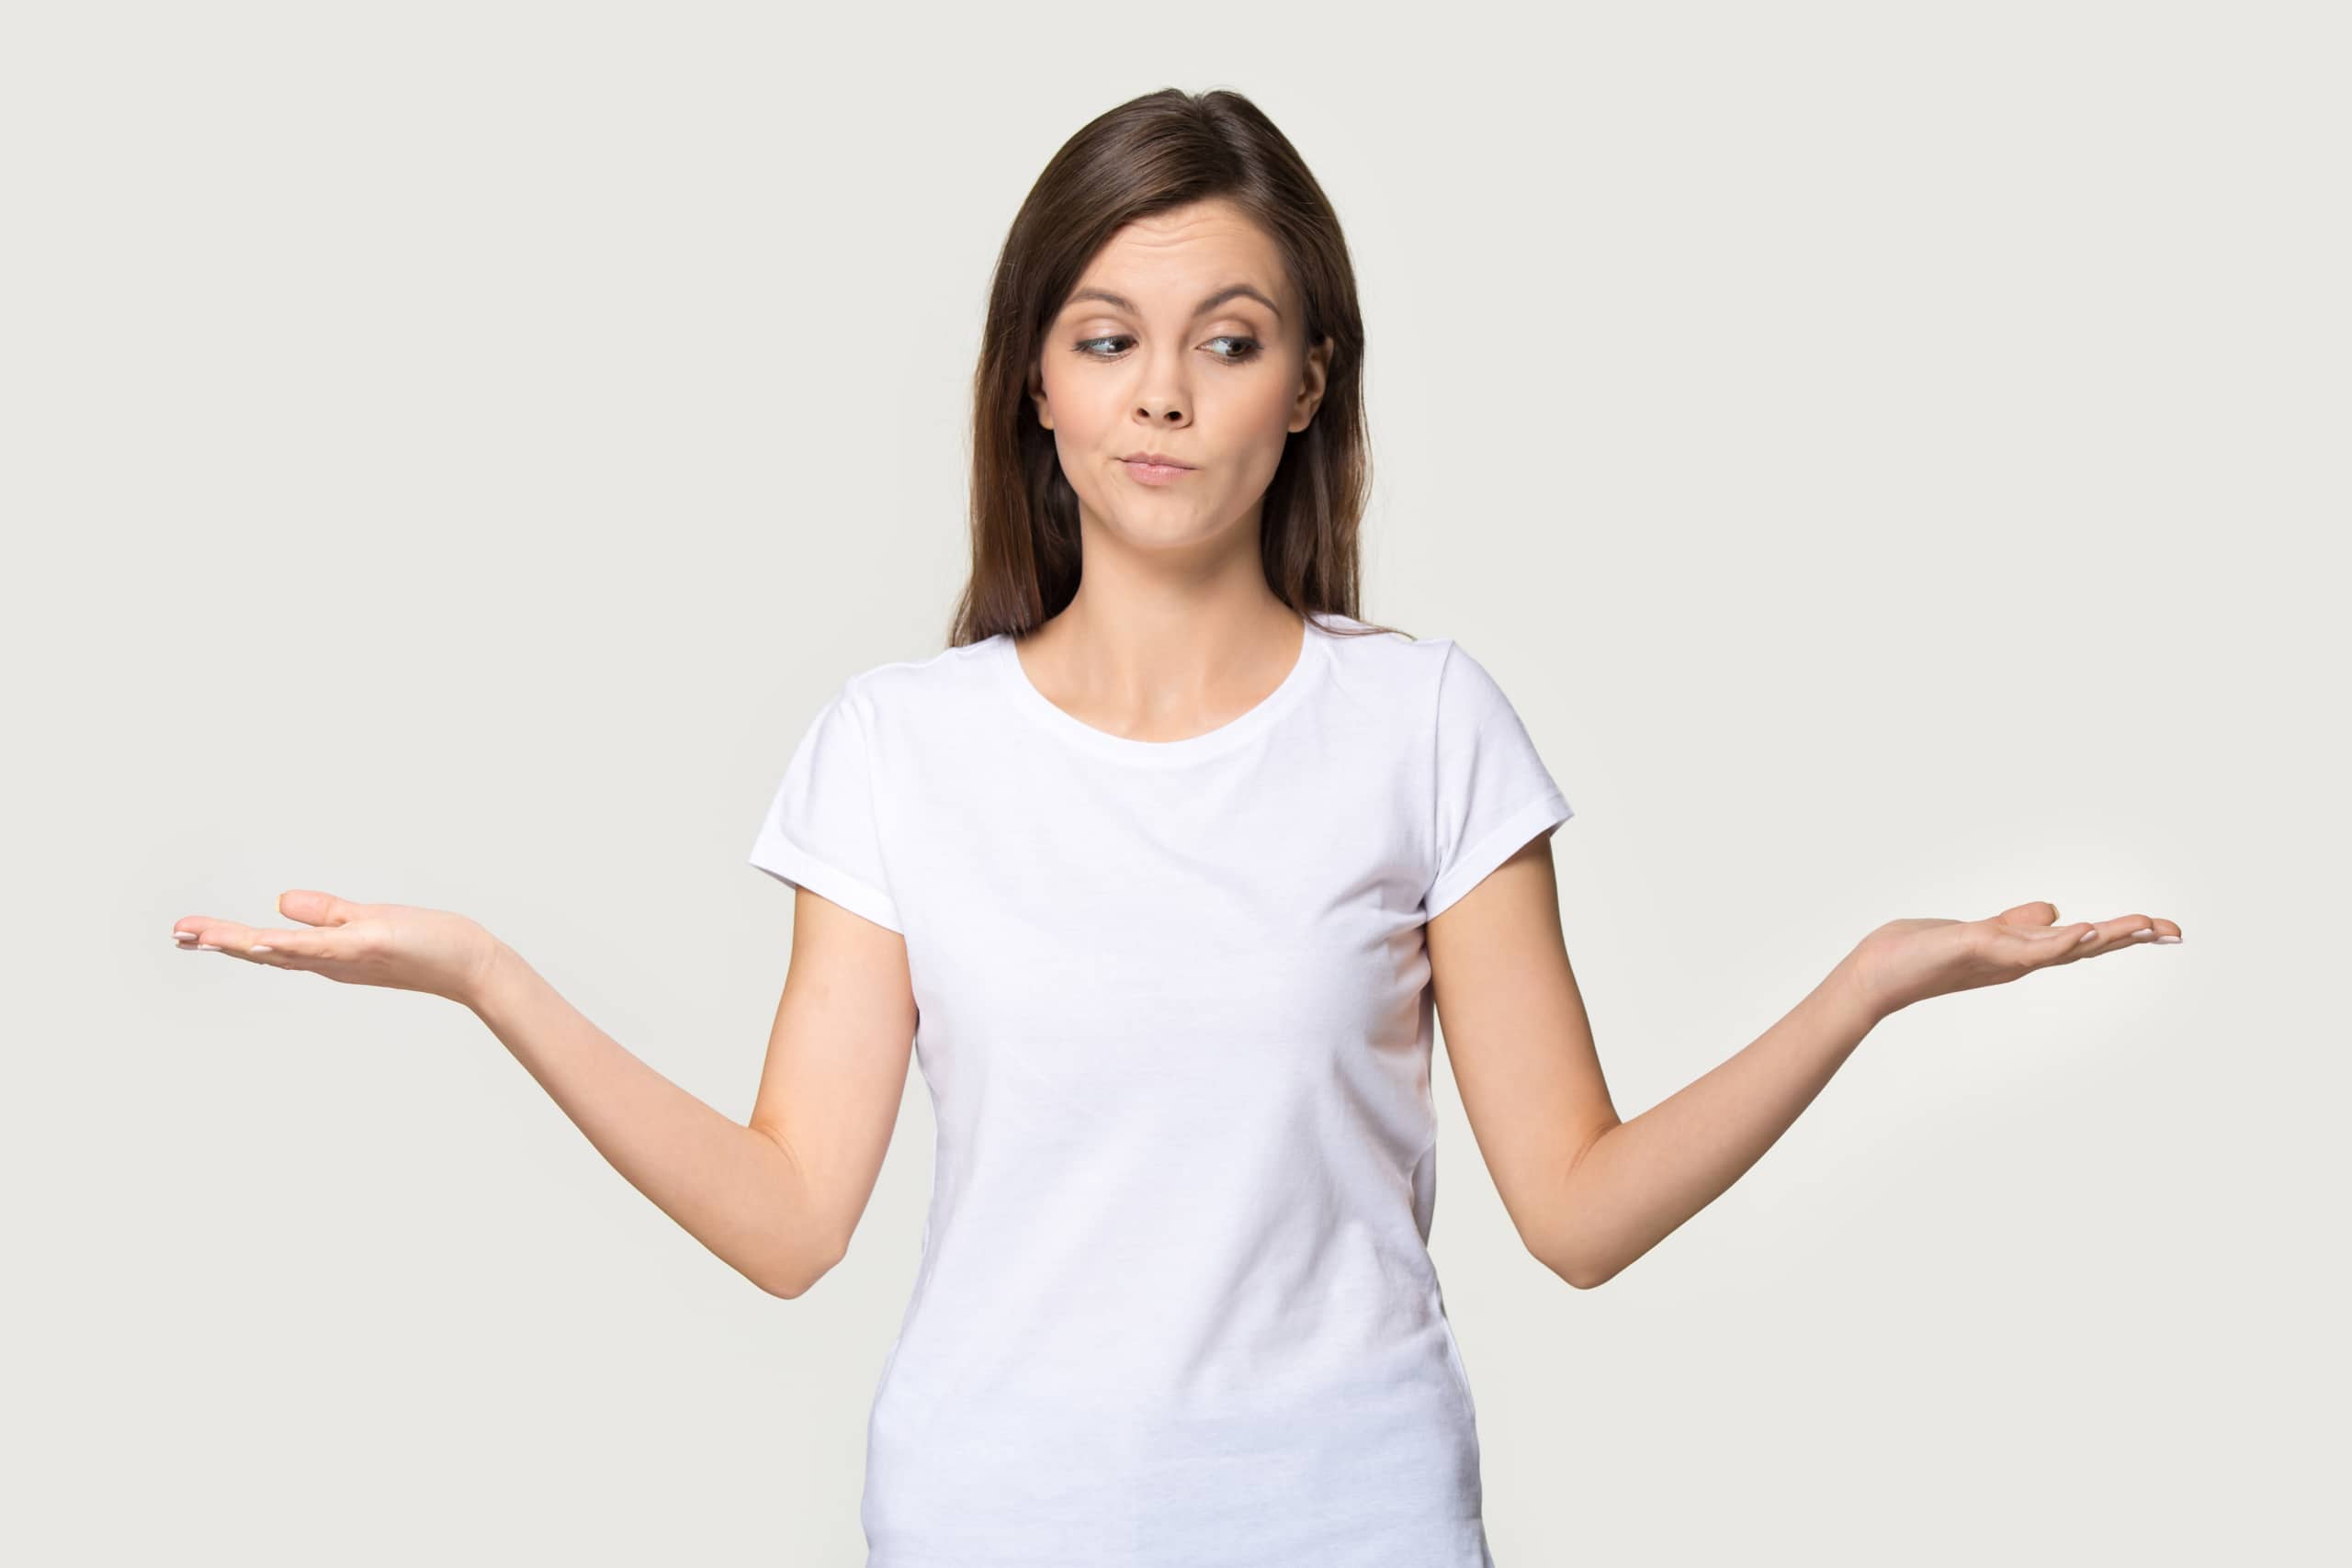 Young,Funny,Woman,Wearing,White,T Shirt,Stretched,Hands,Feels,Confused